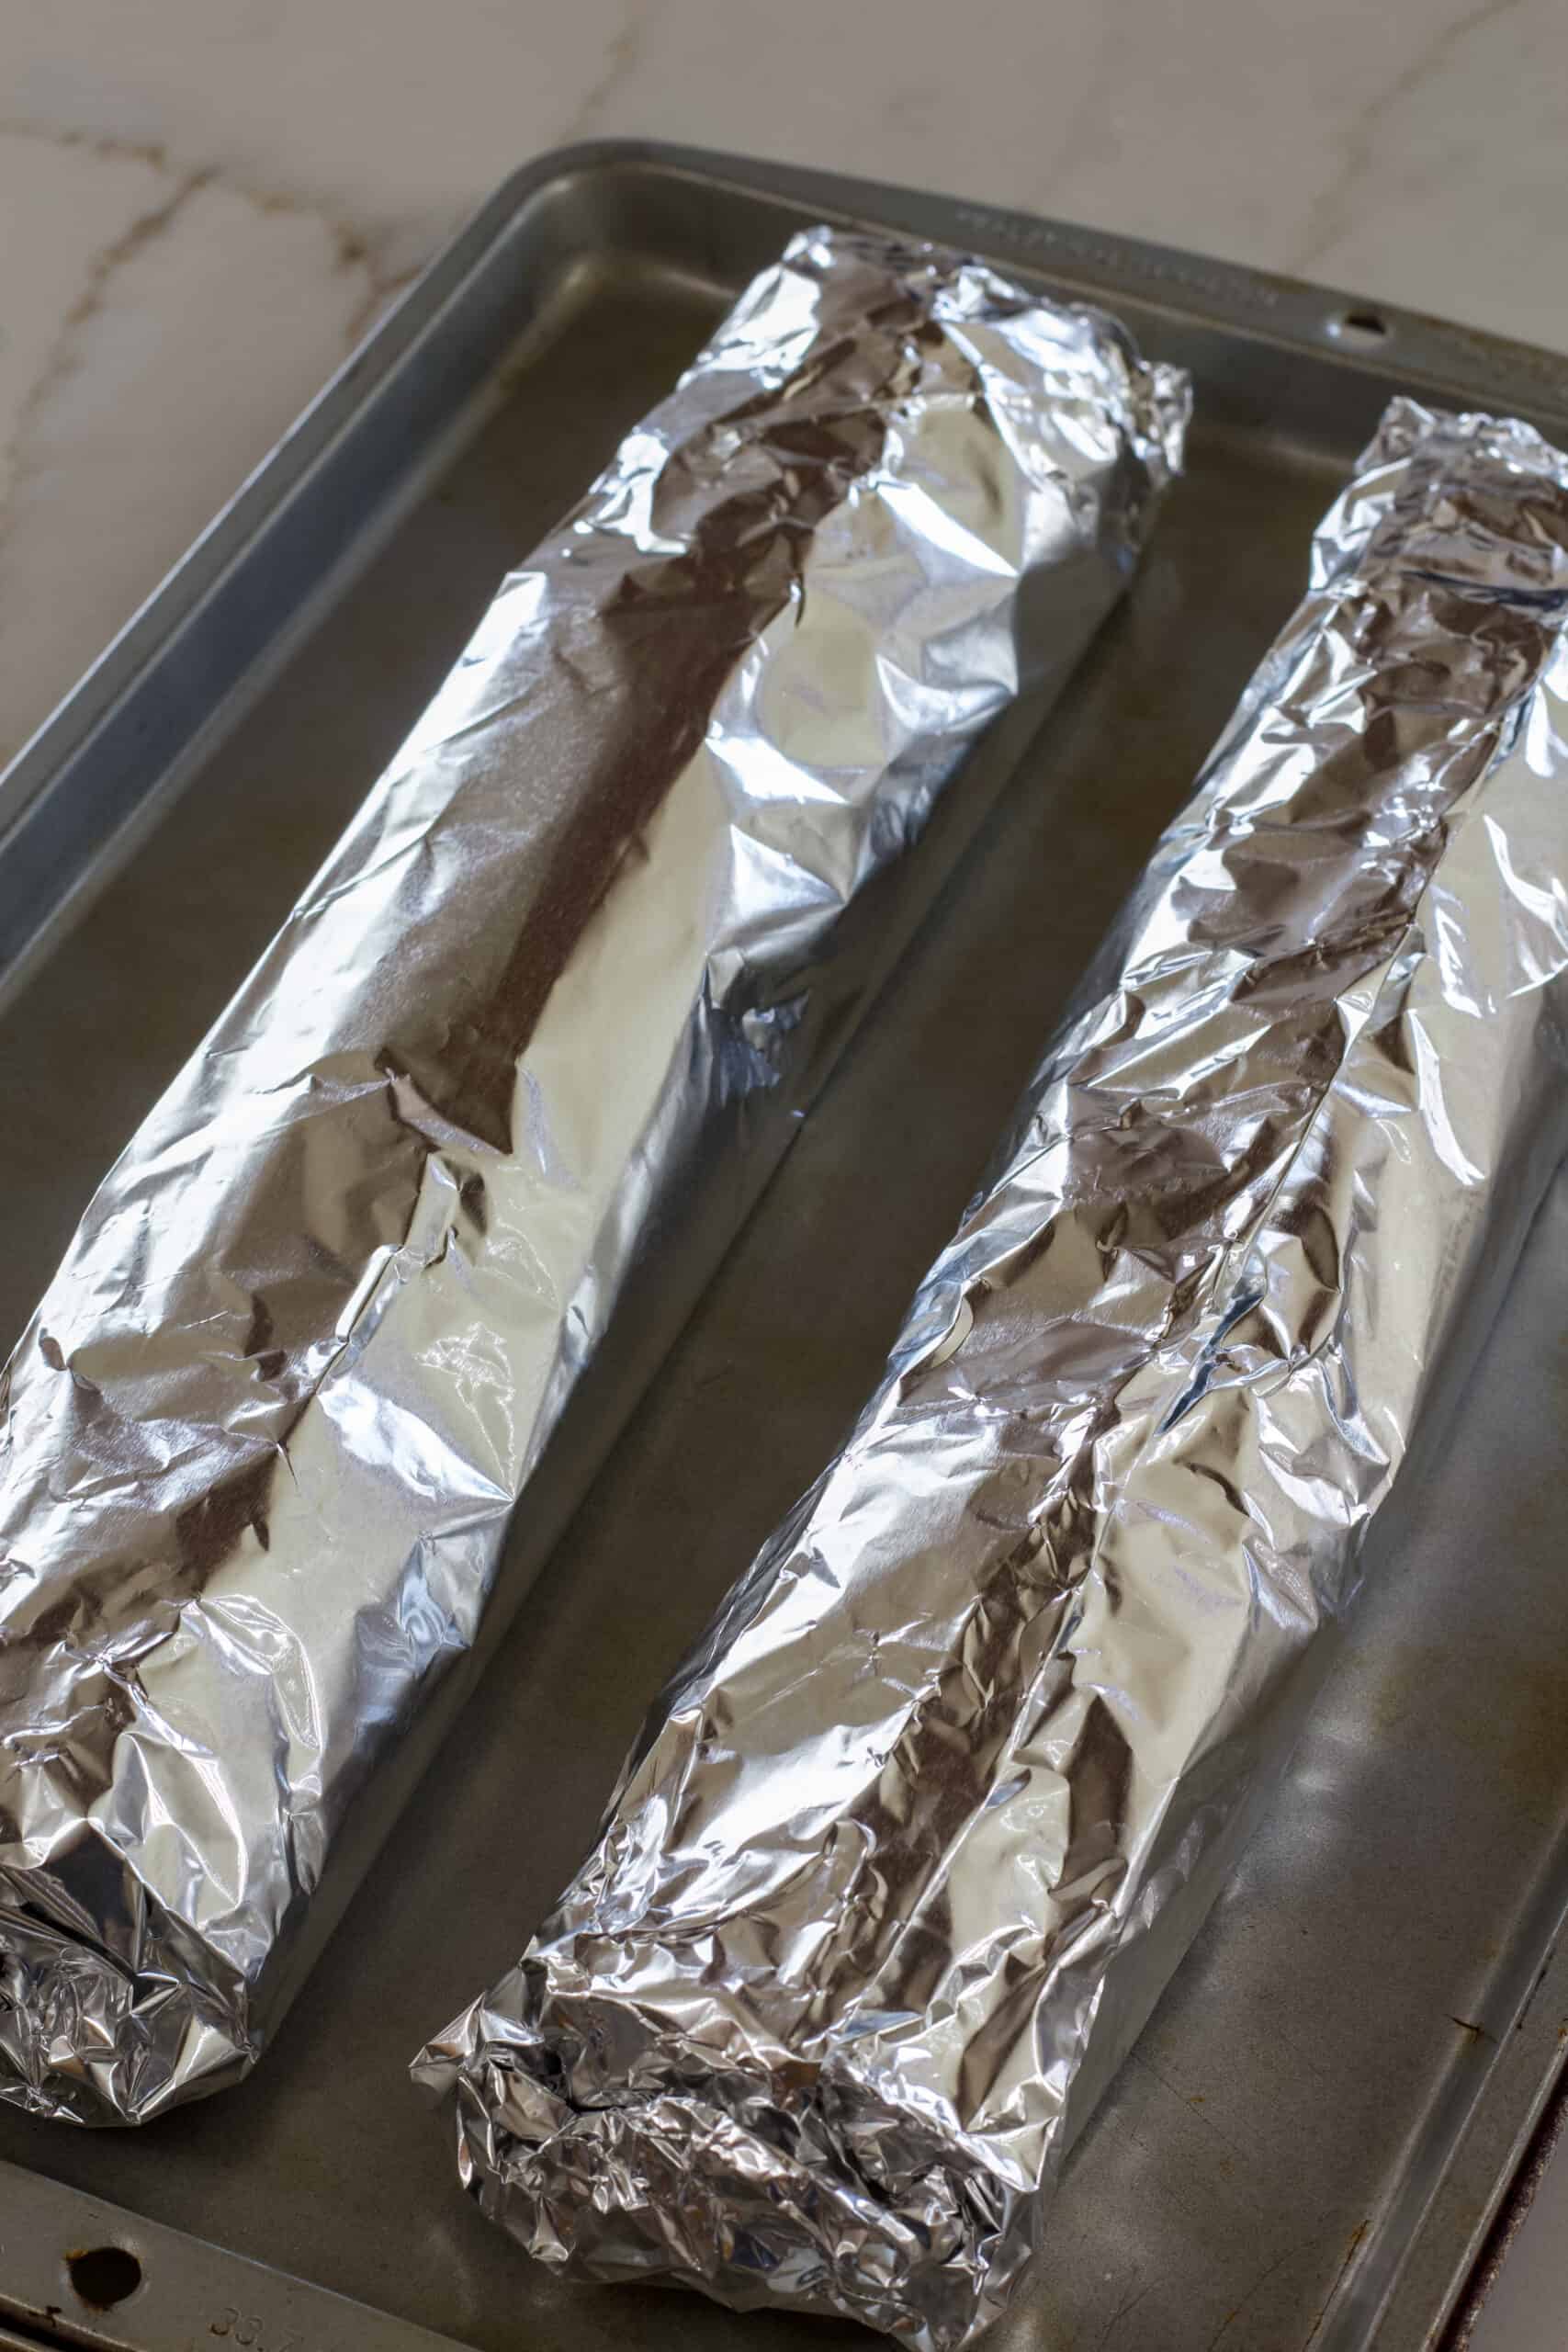 Both half loaves of garlic bread wrapped in aluminum foil ready to go into the oven.